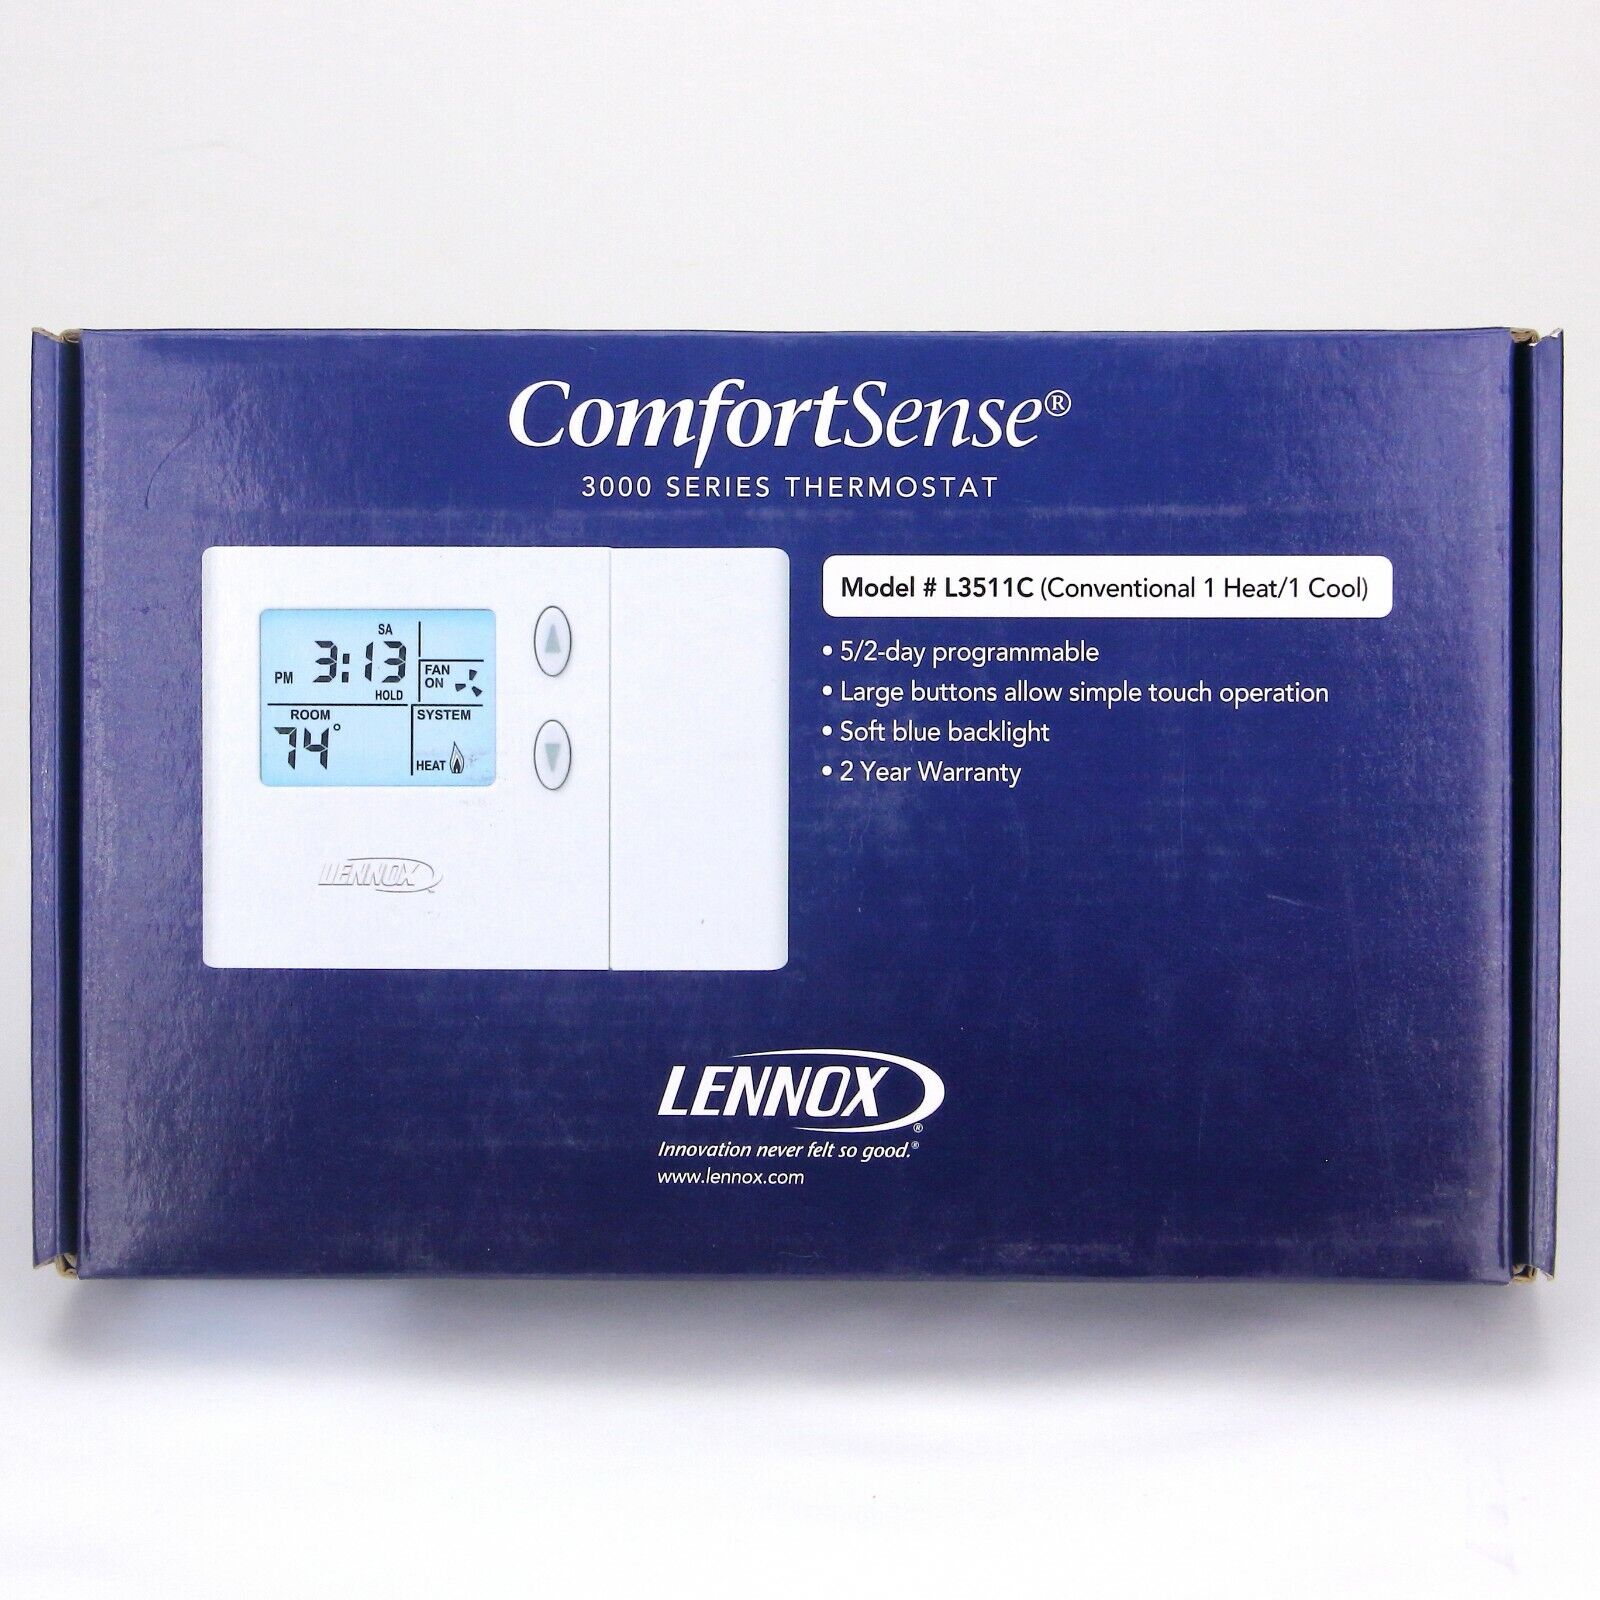 LENNOX 51M34 Programmable Thermostat Model L3511С  Conventional 1 Heat 1 Cool 